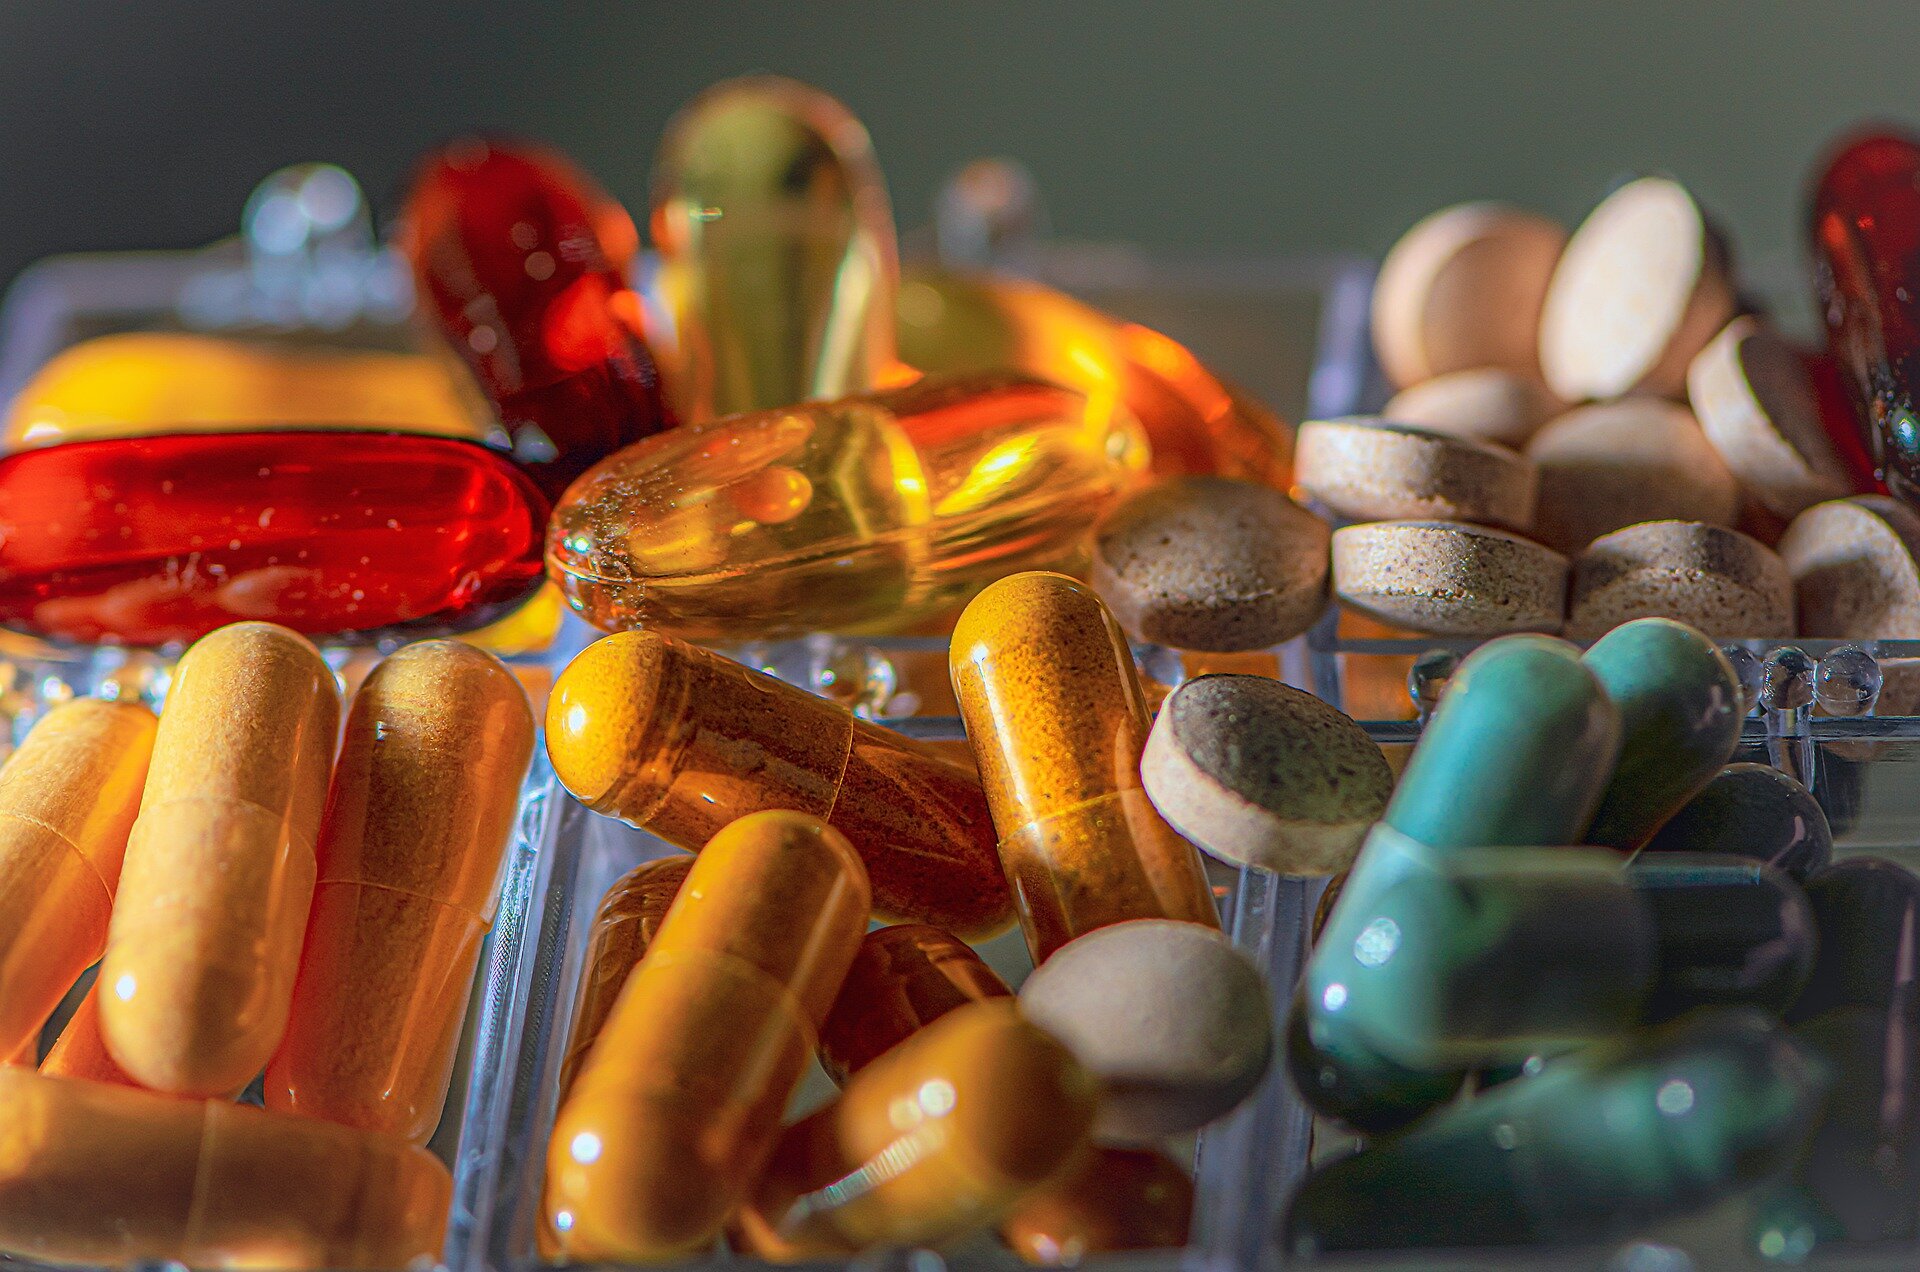 How are vitamin supplements made and is it better to get vitamins through food instead?